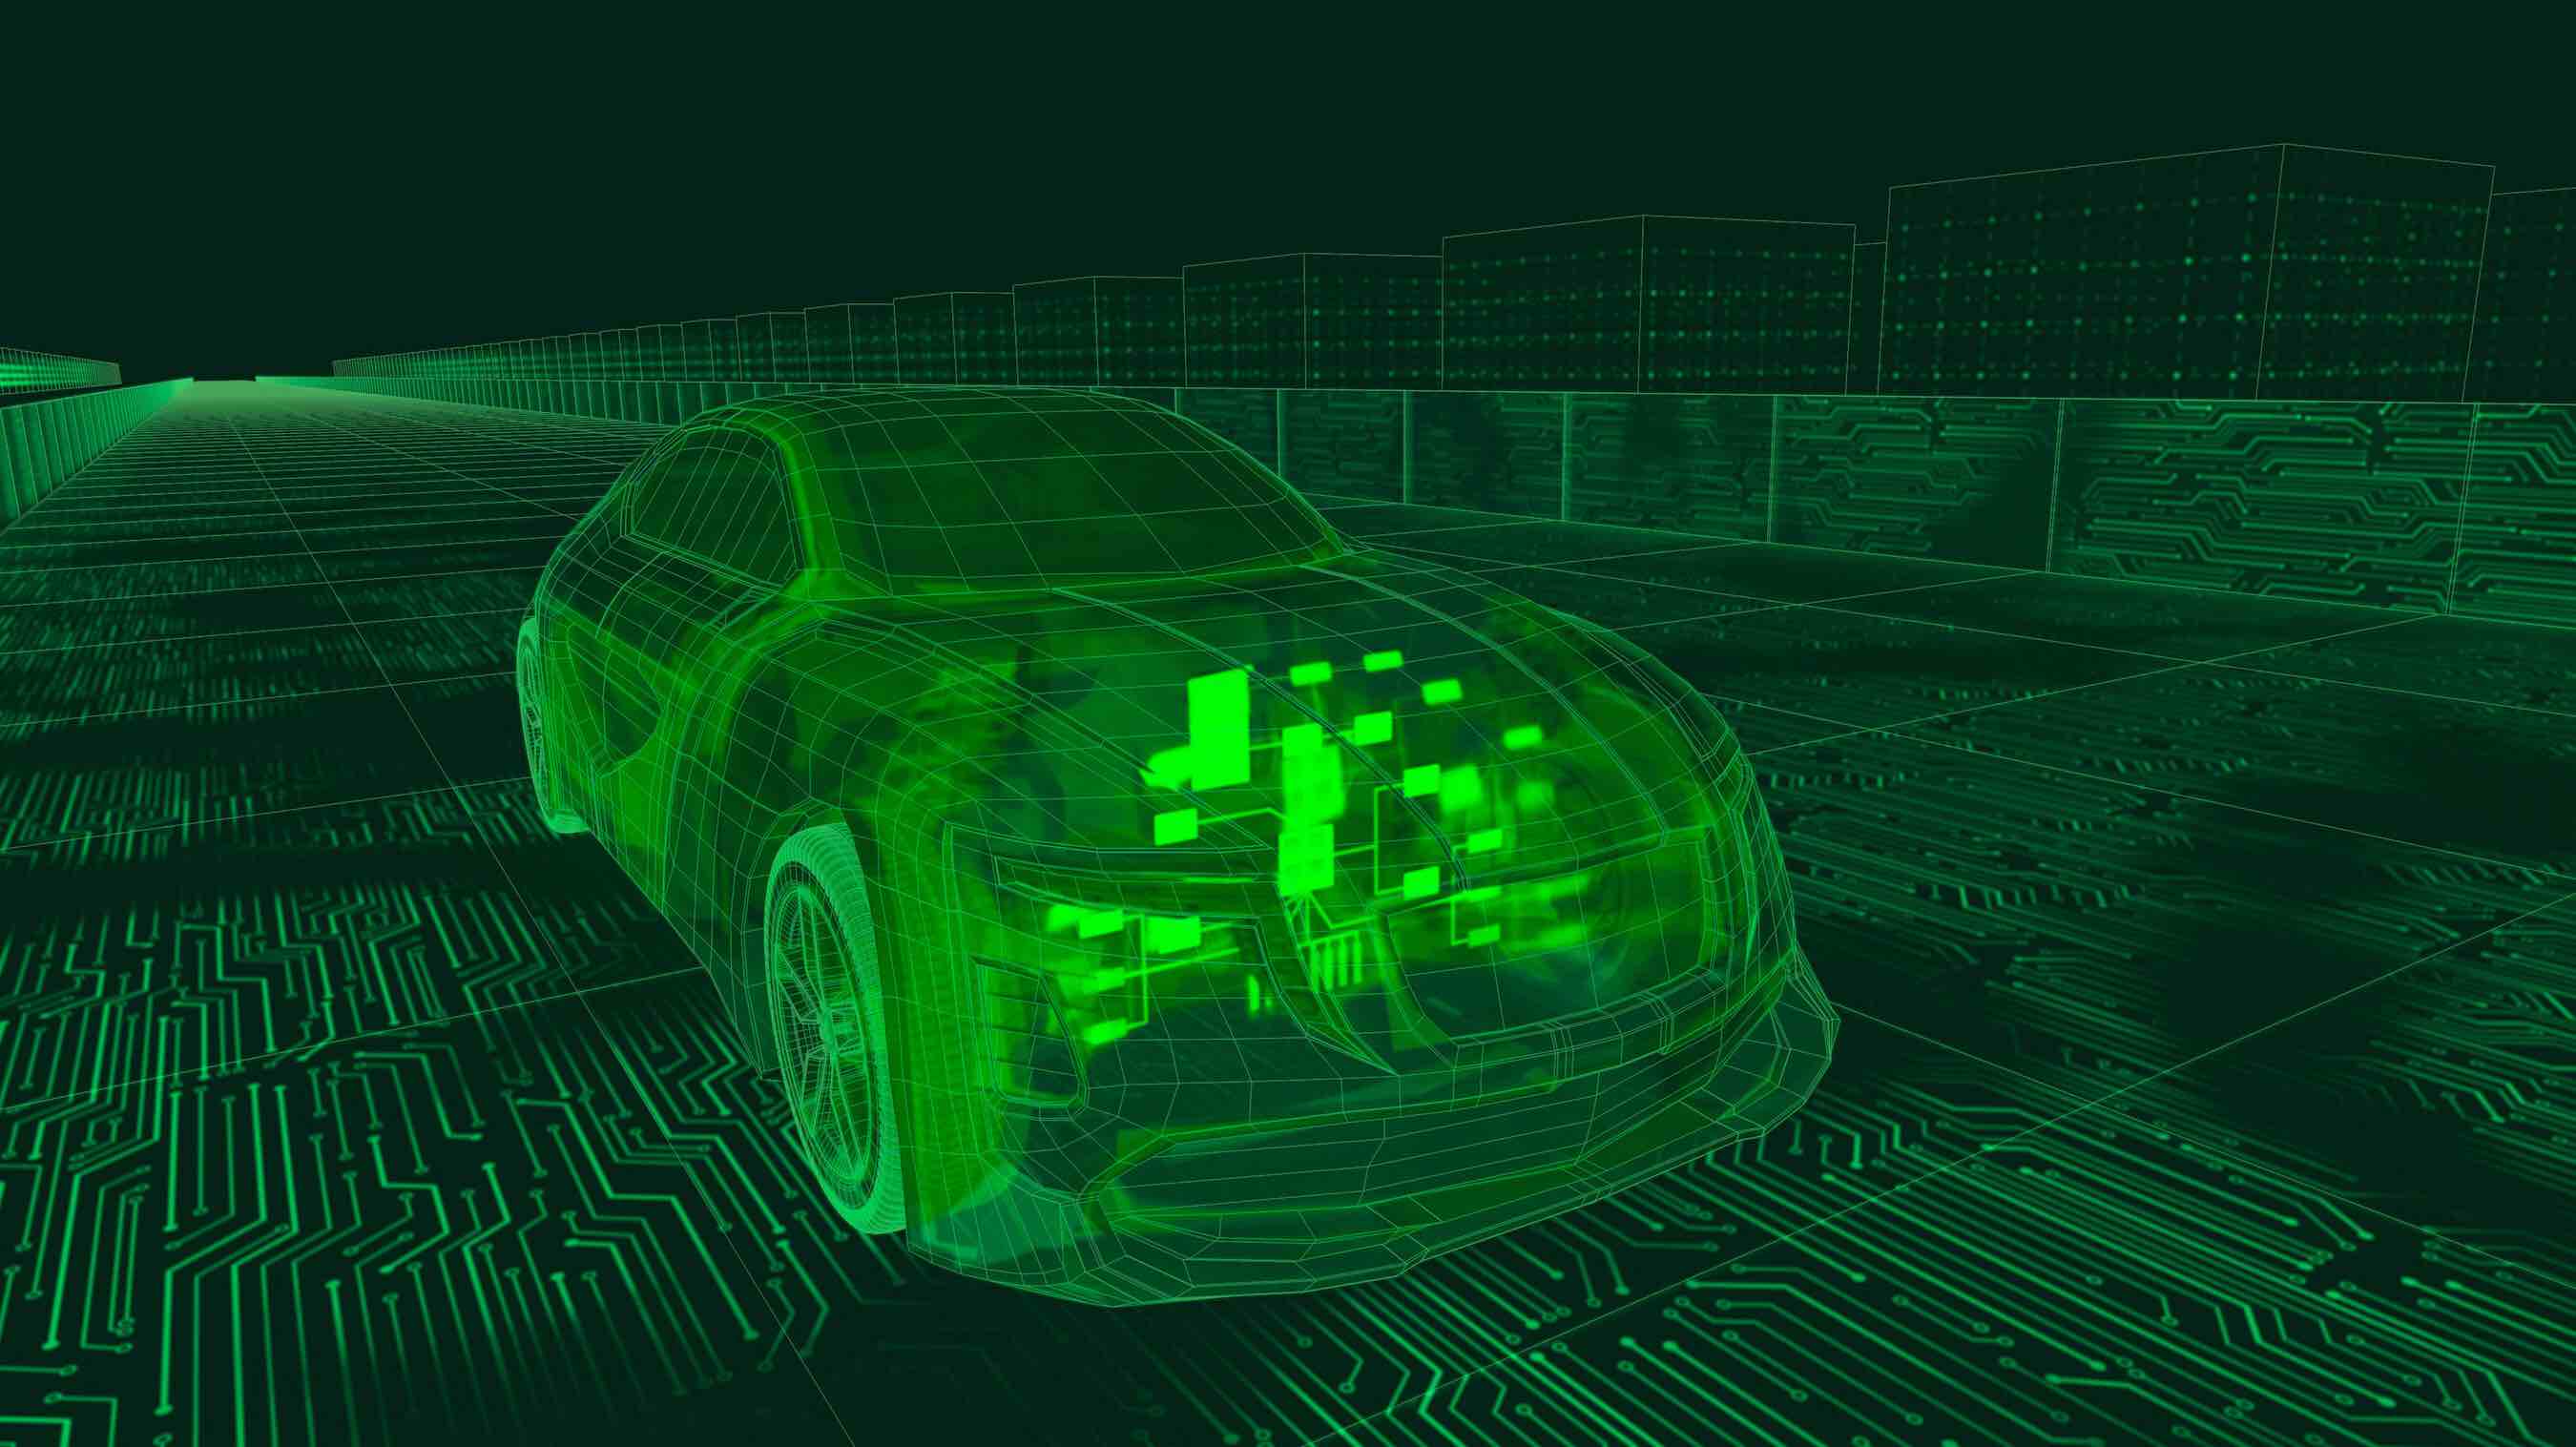 Elektrobit announced on 19th April 2023, that Jaguar Land Rover will use Elektrobit’s software platform and Automotive OS offering to build their next-generation EVA Continuum electrical architecture that will be featured in Jaguar Land Rover’s full line of vehicles from 2024.